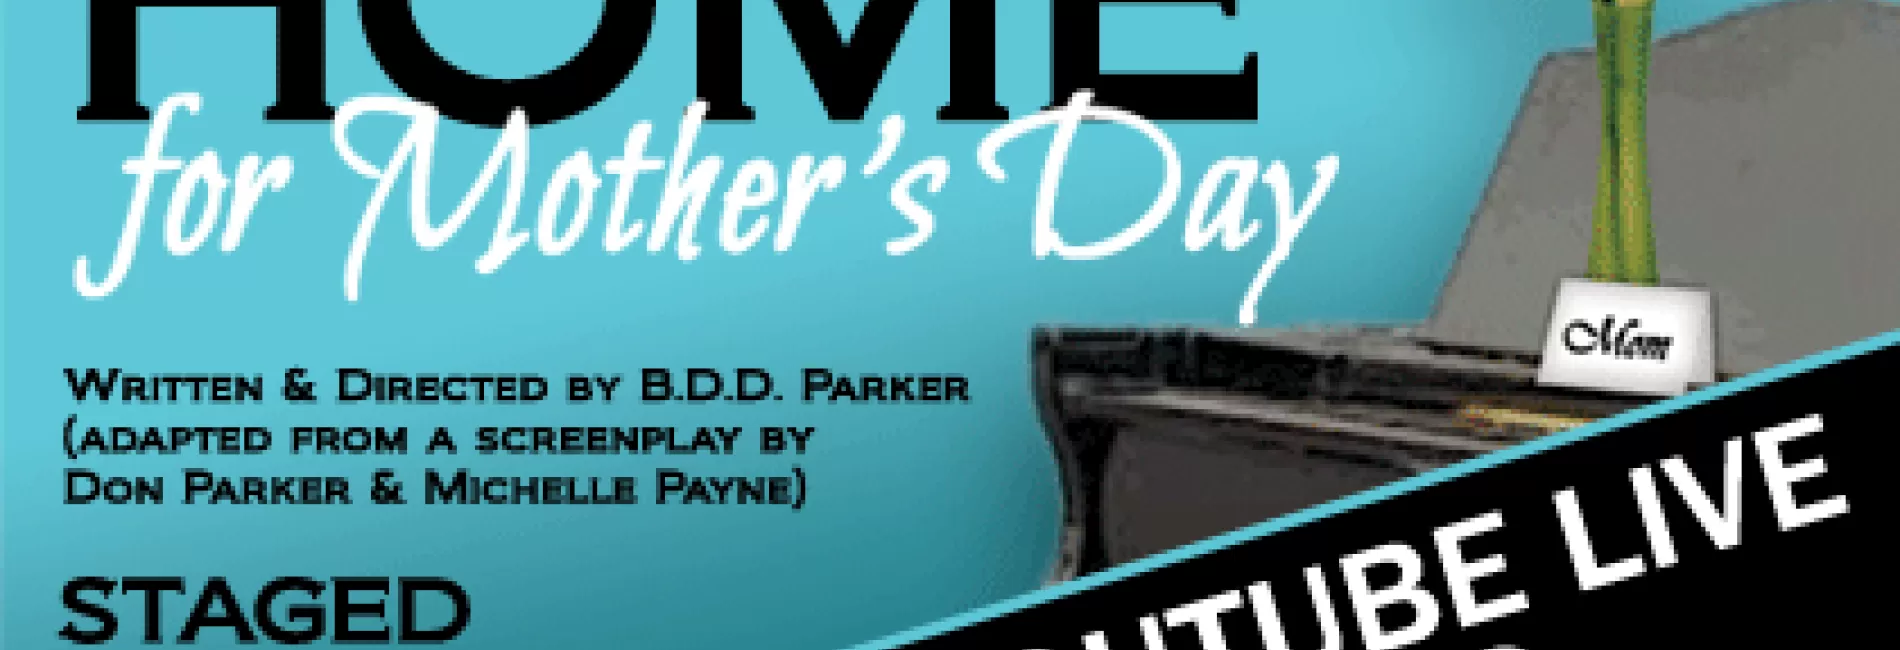 Home for Mother's Day: Staged Reading, Free Live Stream